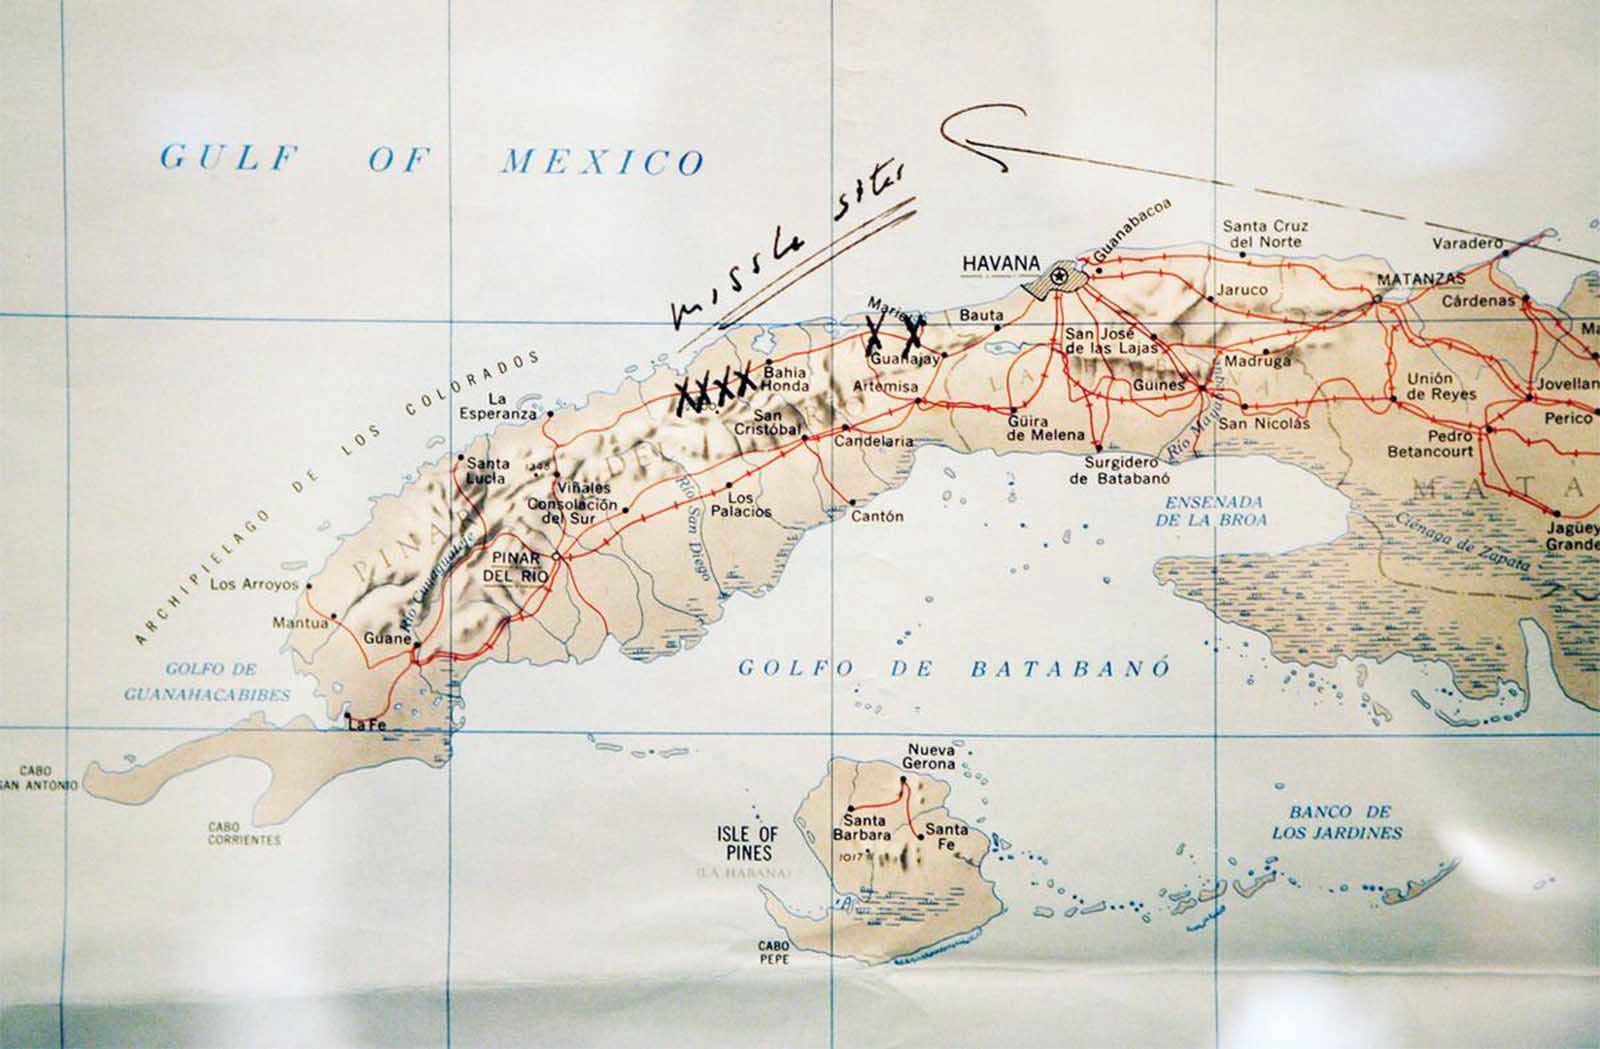 A map of Cuba annotated by former U.S. President John F. Kennedy, displayed for the first time at the John F. Kennedy Library in Boston, Massachusetts, on July 13, 2005. Former President Kennedy wrote “Missile Sites” on the map and marked them with an X when he was first briefed by the CIA on the Cuban Missile Crisis on October 16, 1962.